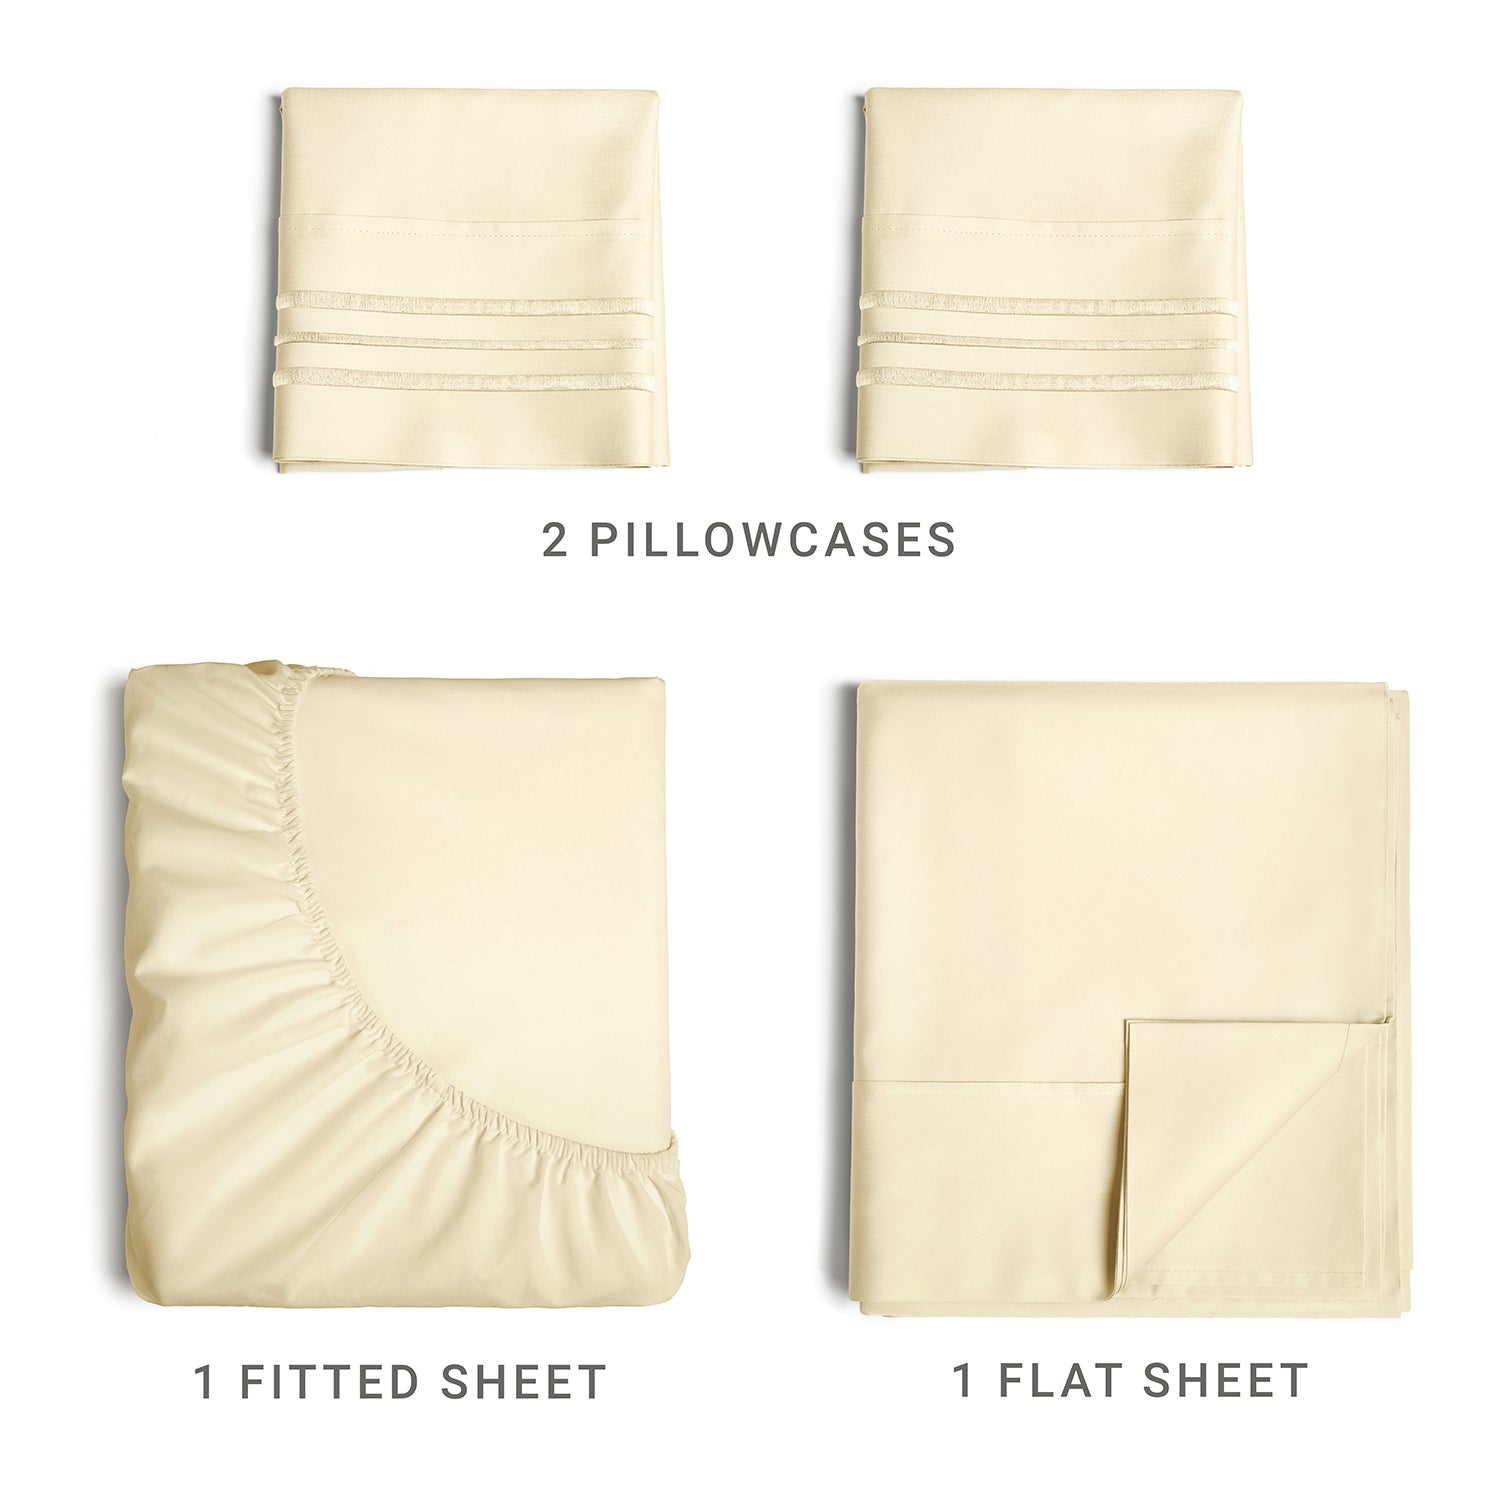 tes 4pc Sheet Set New Colors/Patterns - Off White